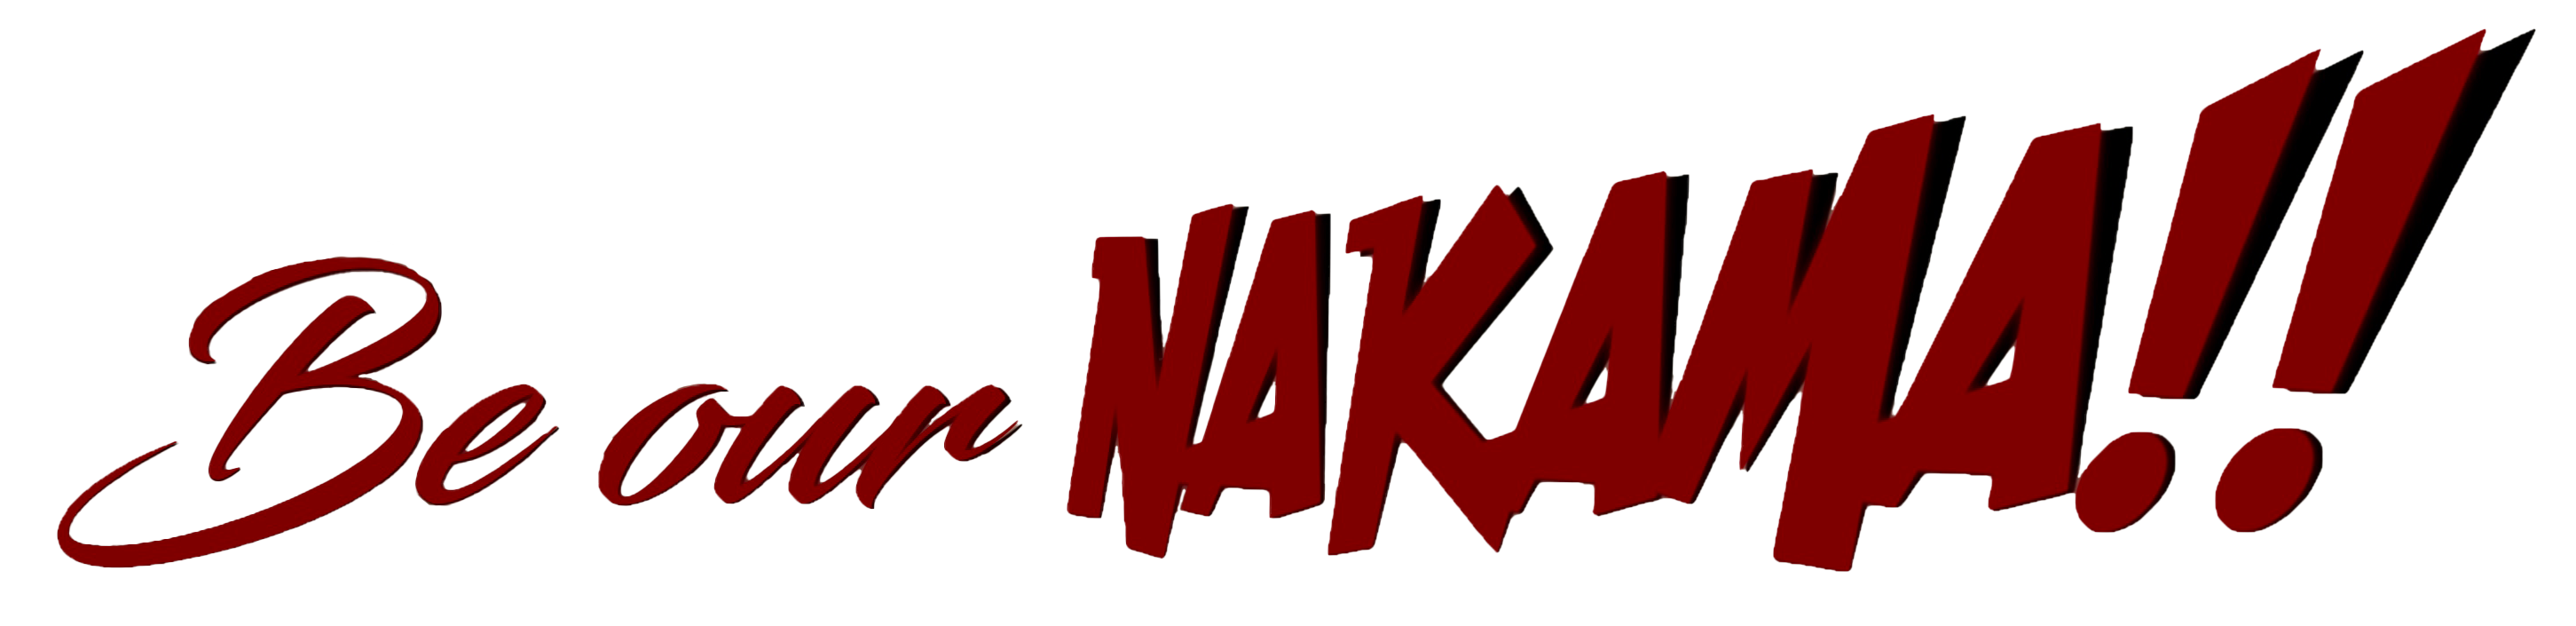 Be Our Nakama